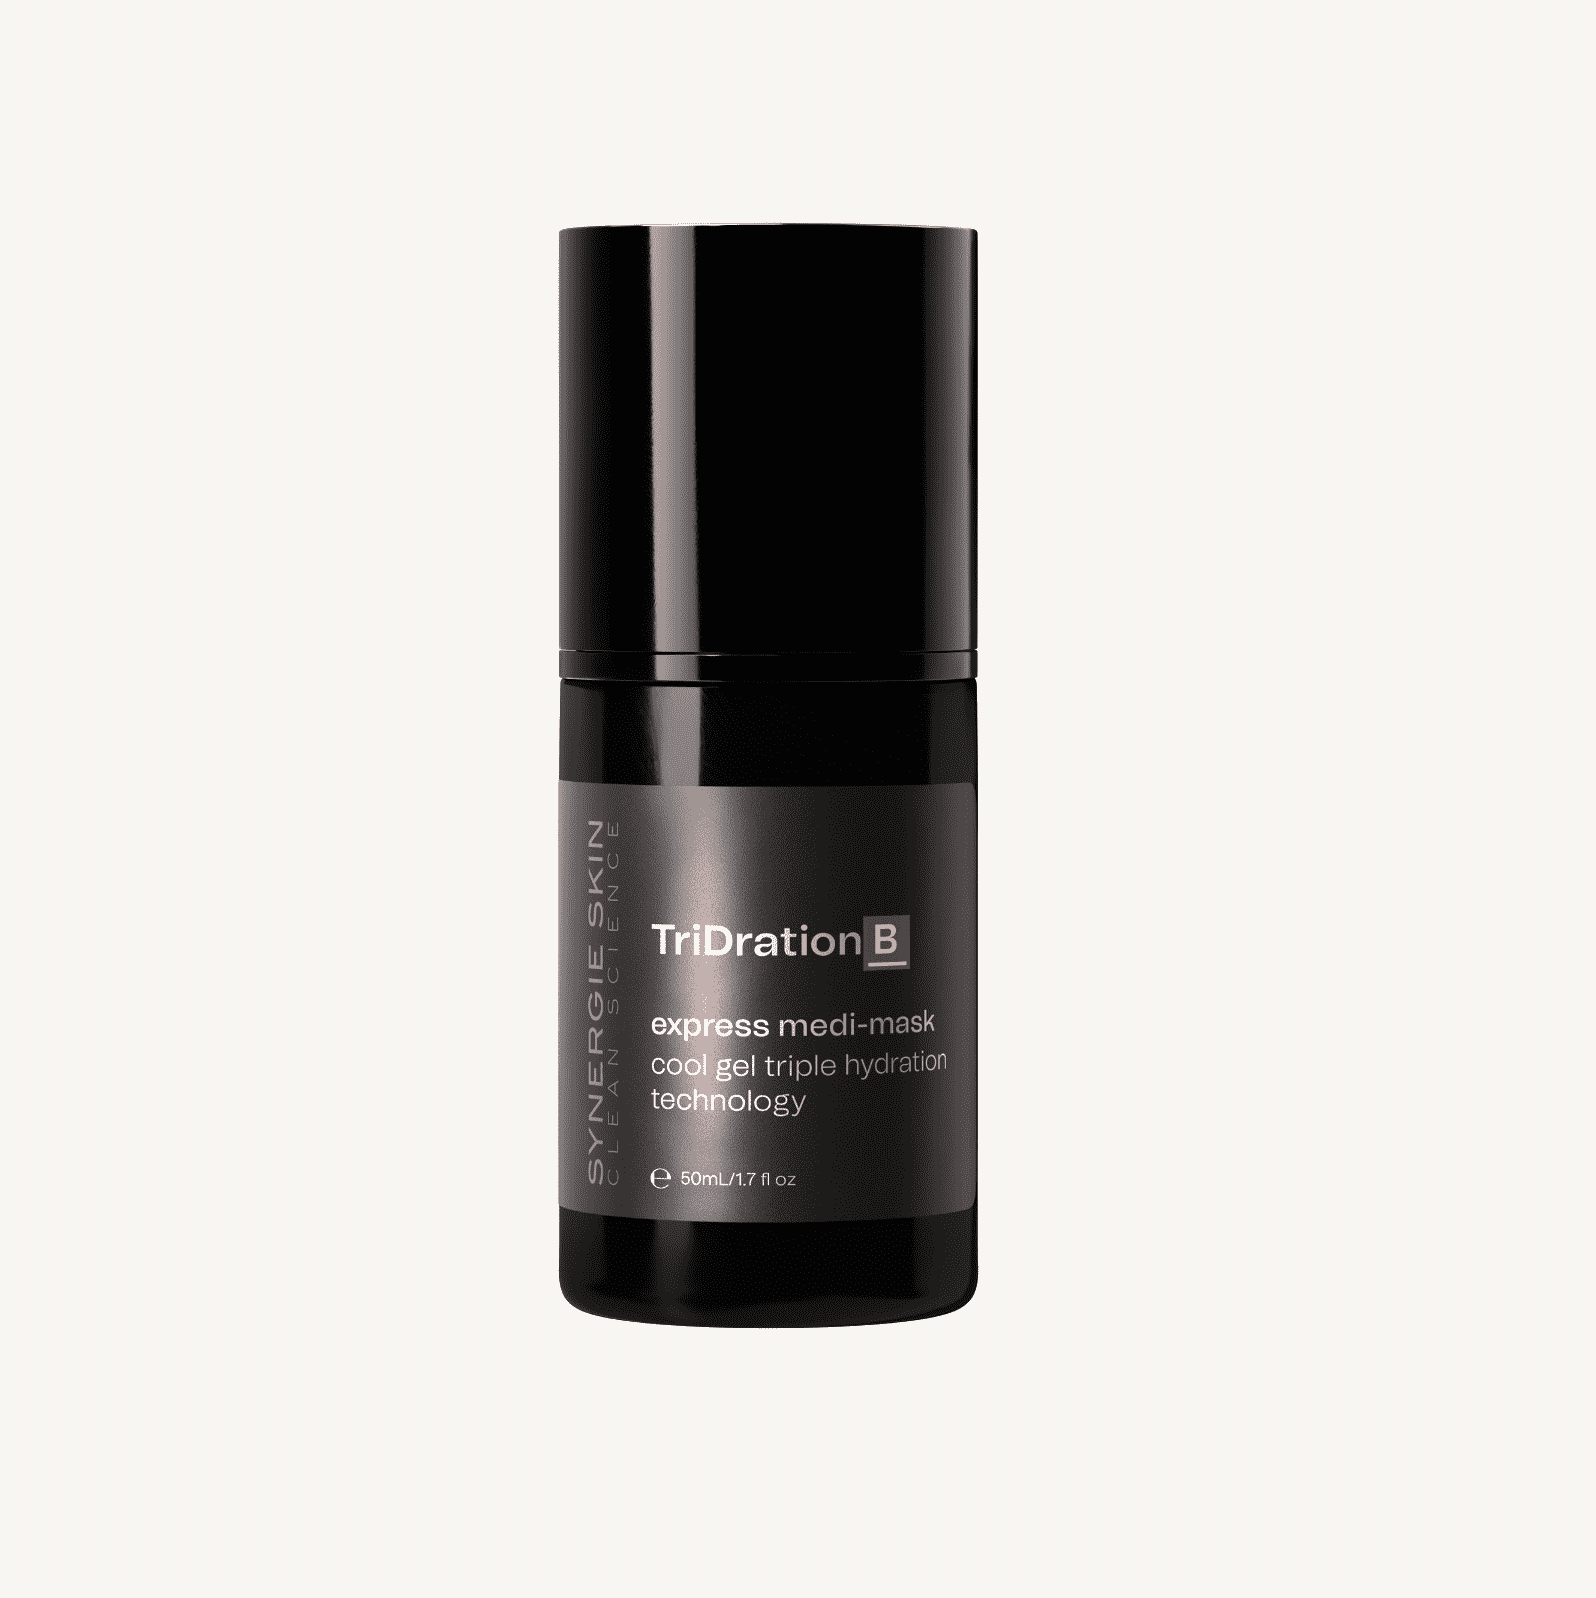 A cylindrical black skincare product container labeled "tridration b" from infuse by inn, described as an "express medi-mask cool gel triple hydration technology." it contains 50 ml of product.